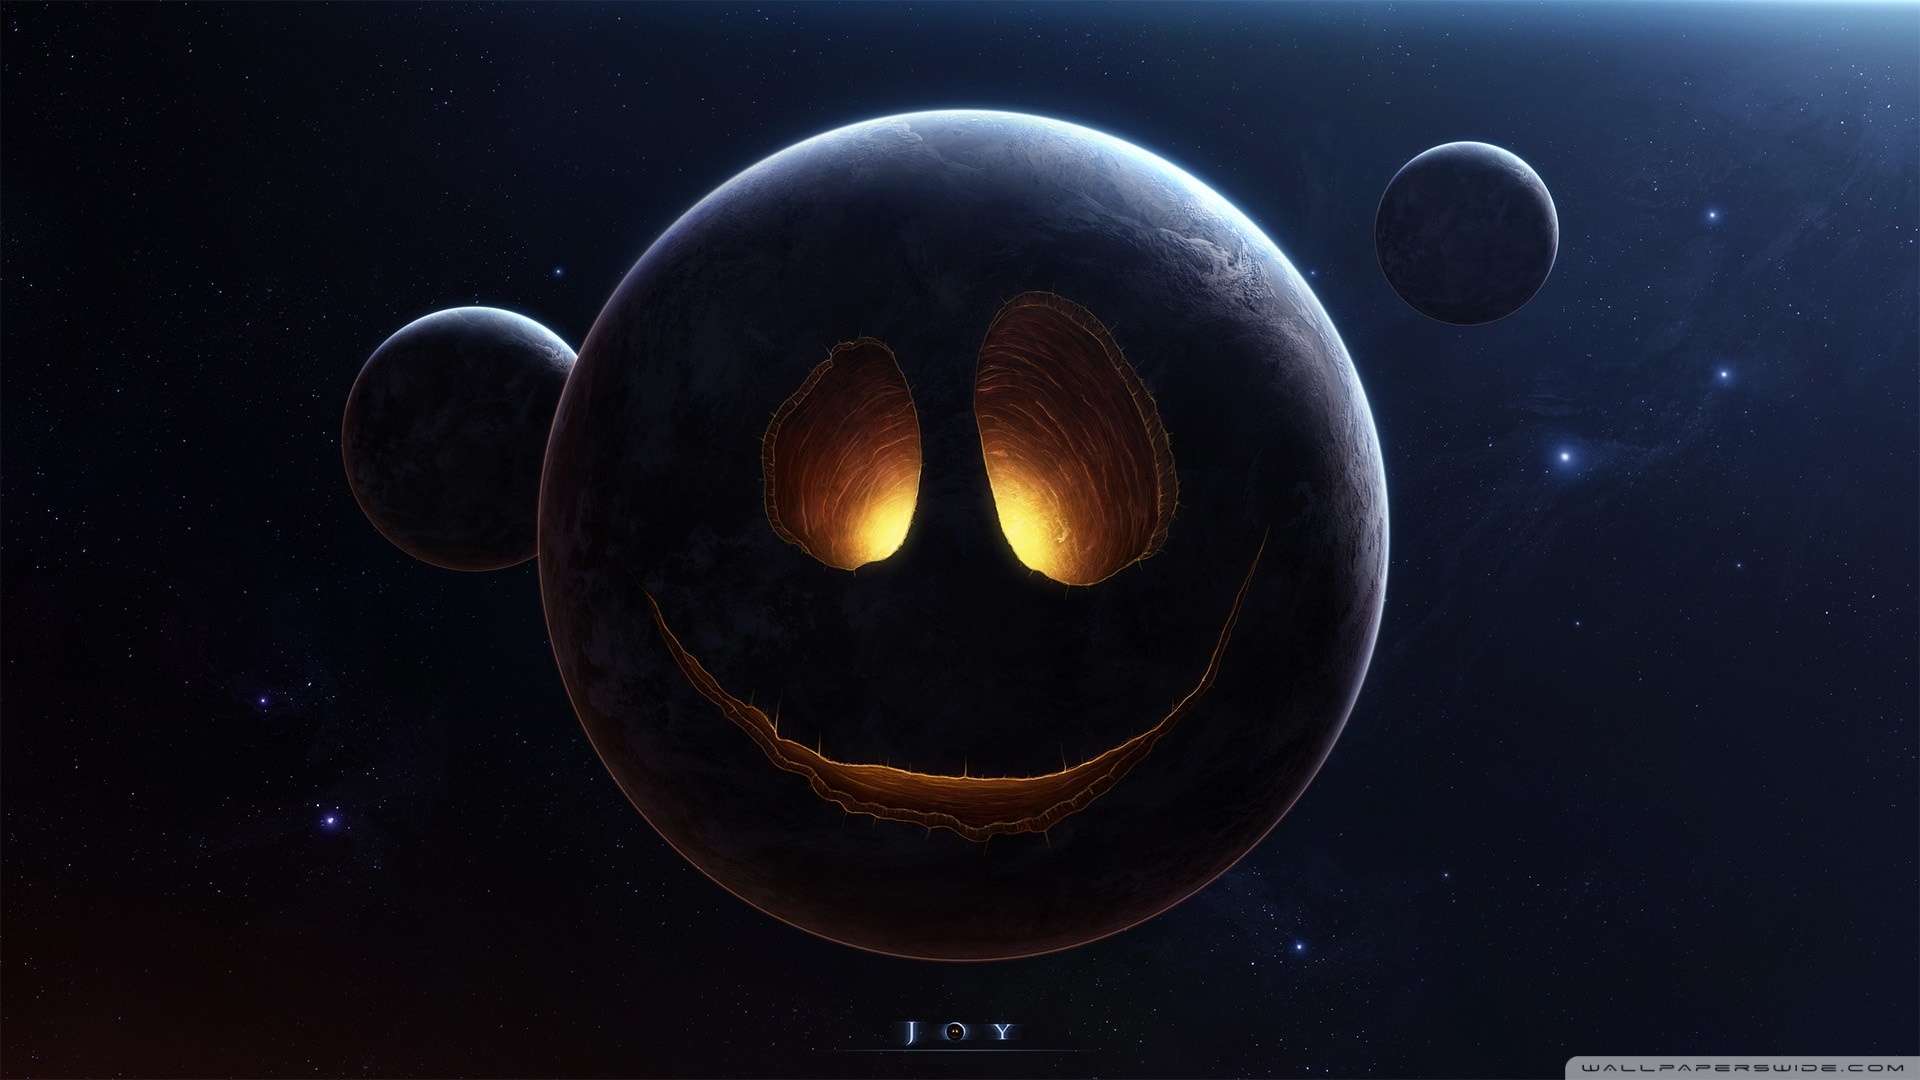 Funny Smiley Space Image